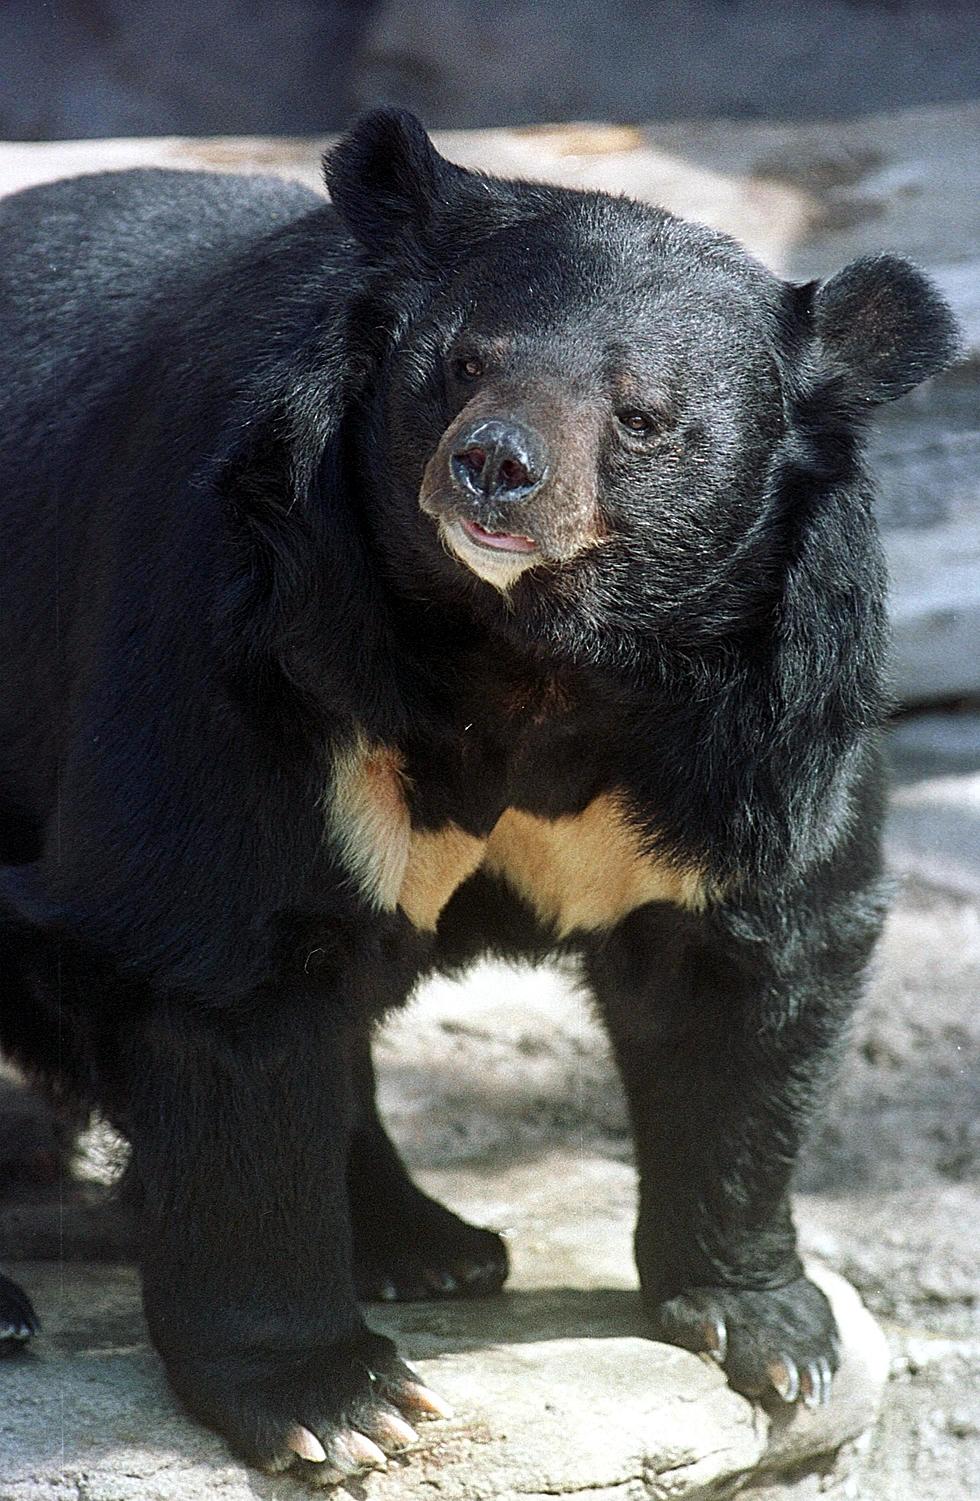 Woman Punches Bear In Snout!